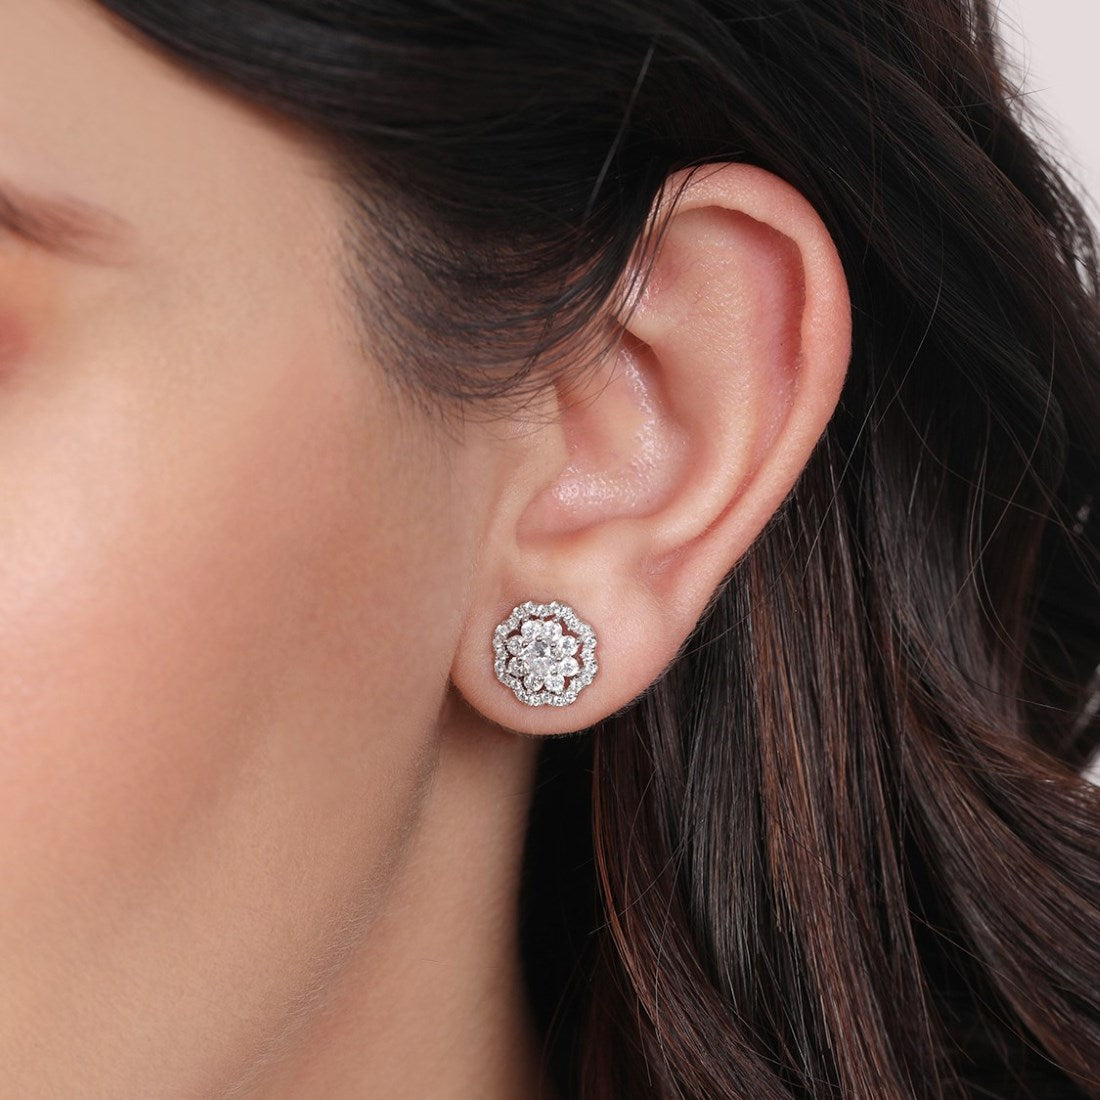 CZ Studded Floral 925 Sterling Silver Stud Earrings